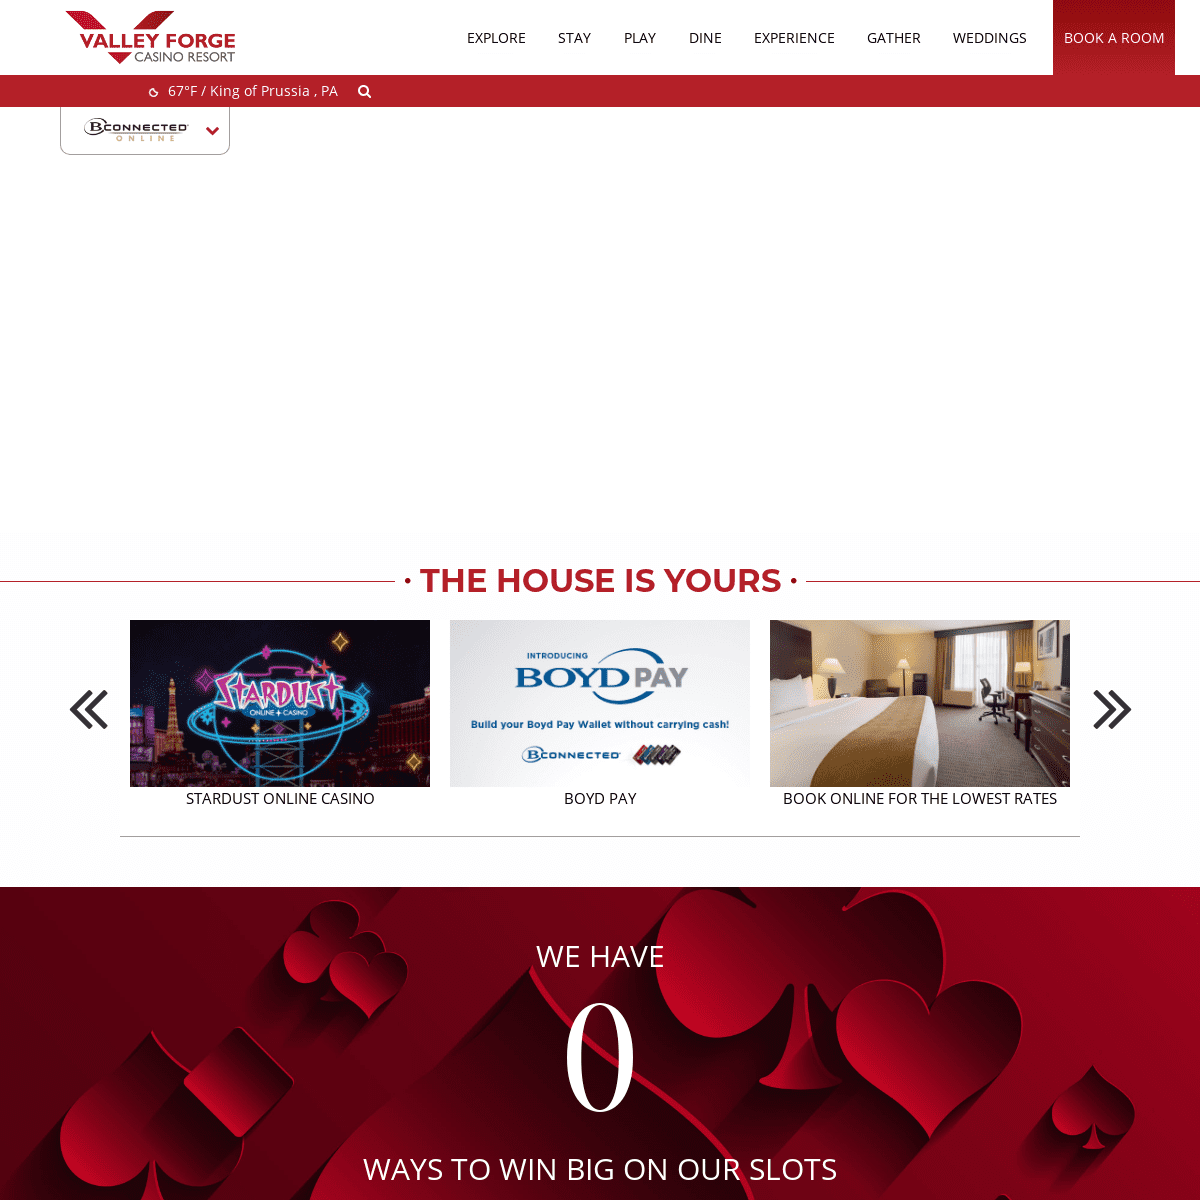 A complete backup of https://vfcasino.com